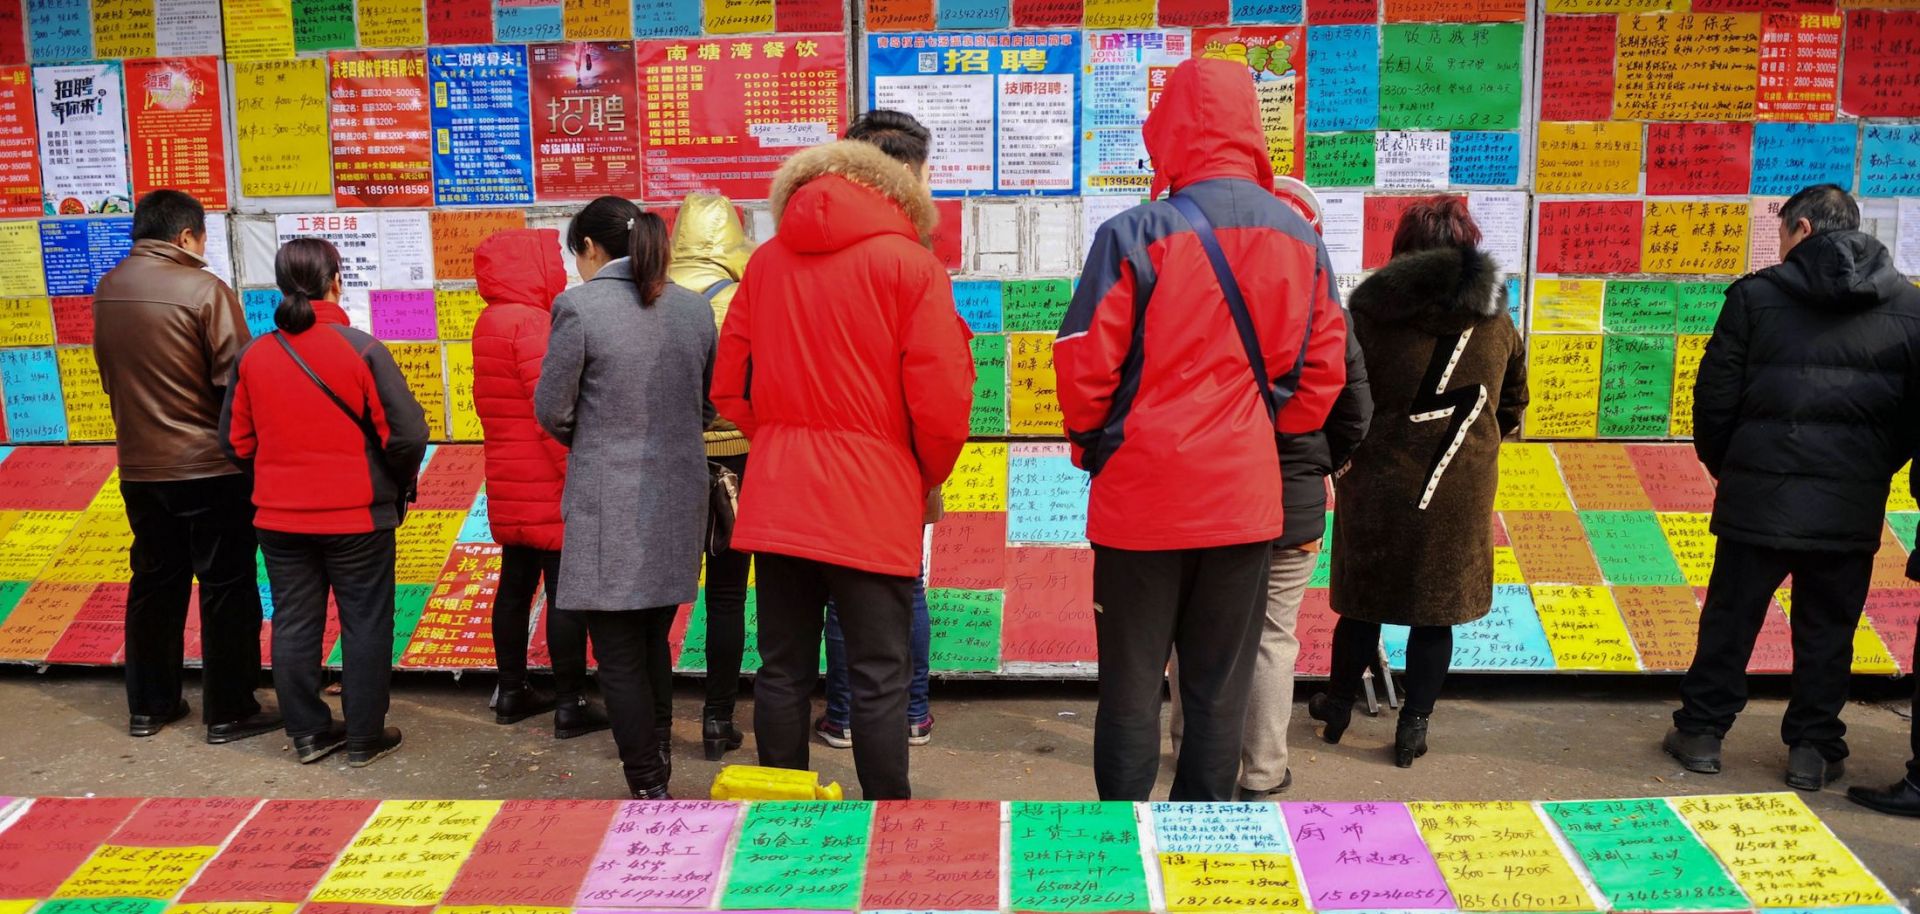 This picture taken on Feb. 20, 2019, shows job seekers looking at employment postings at a recruitment fair in Qingdao in China's eastern Shandong province.